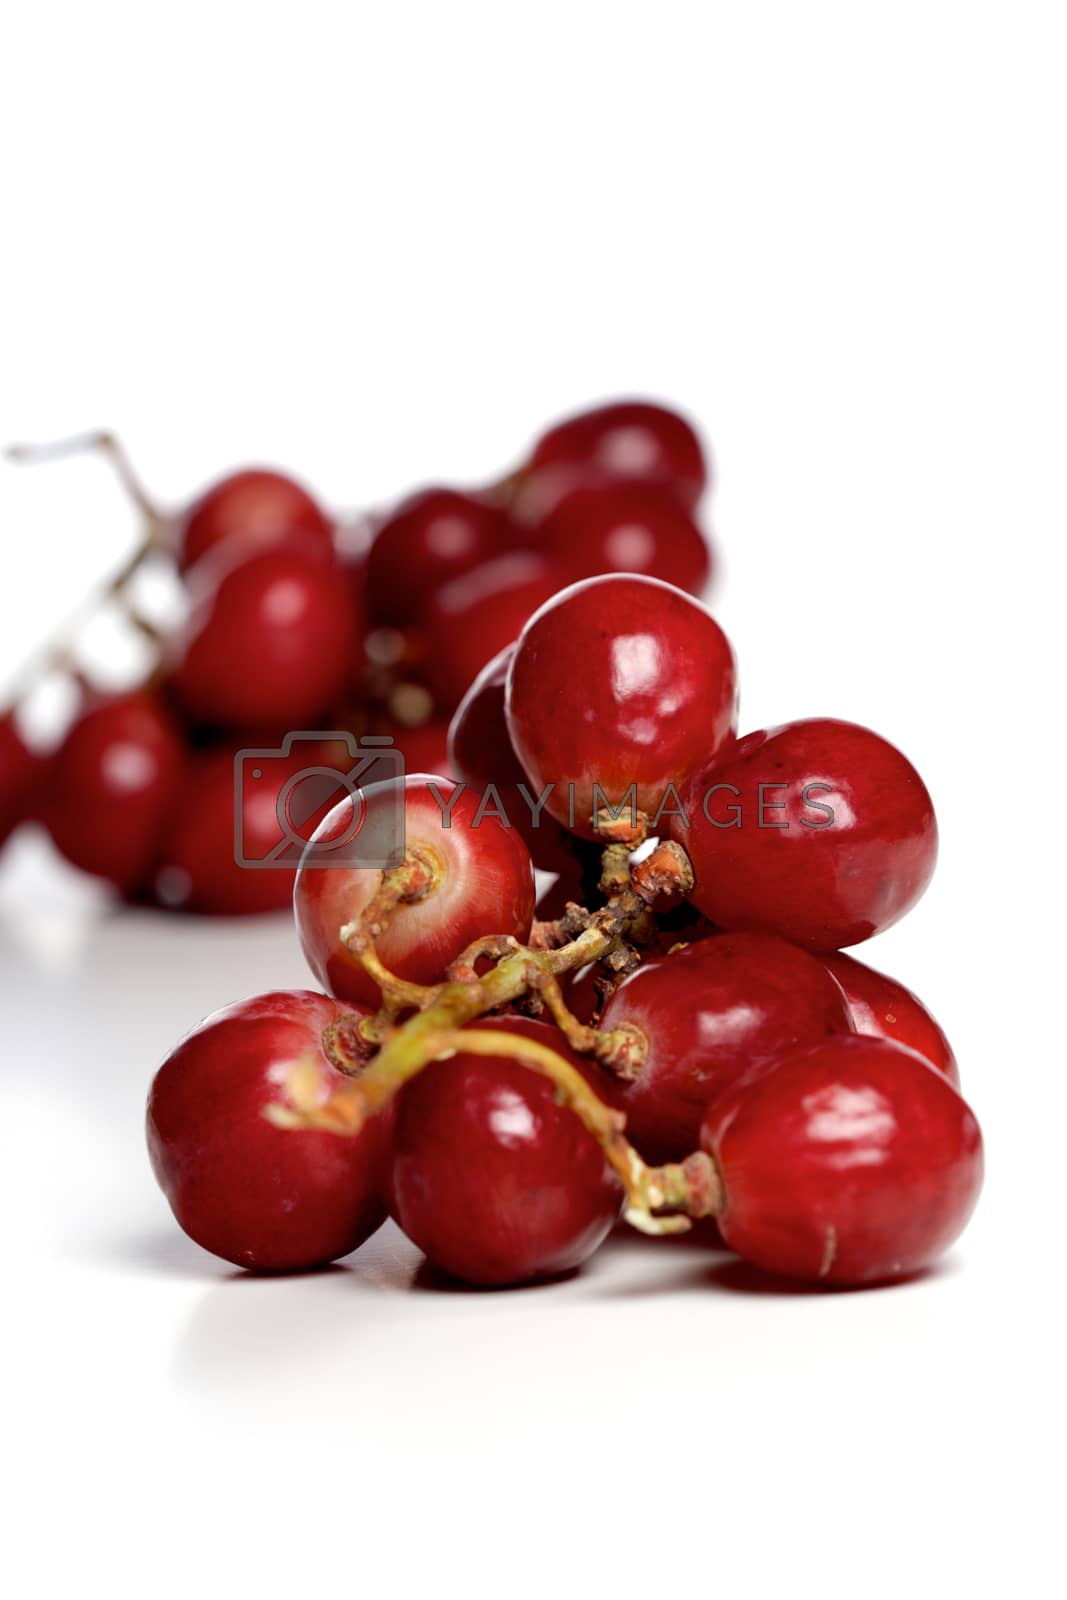 Royalty free image of Grapes by moodboard